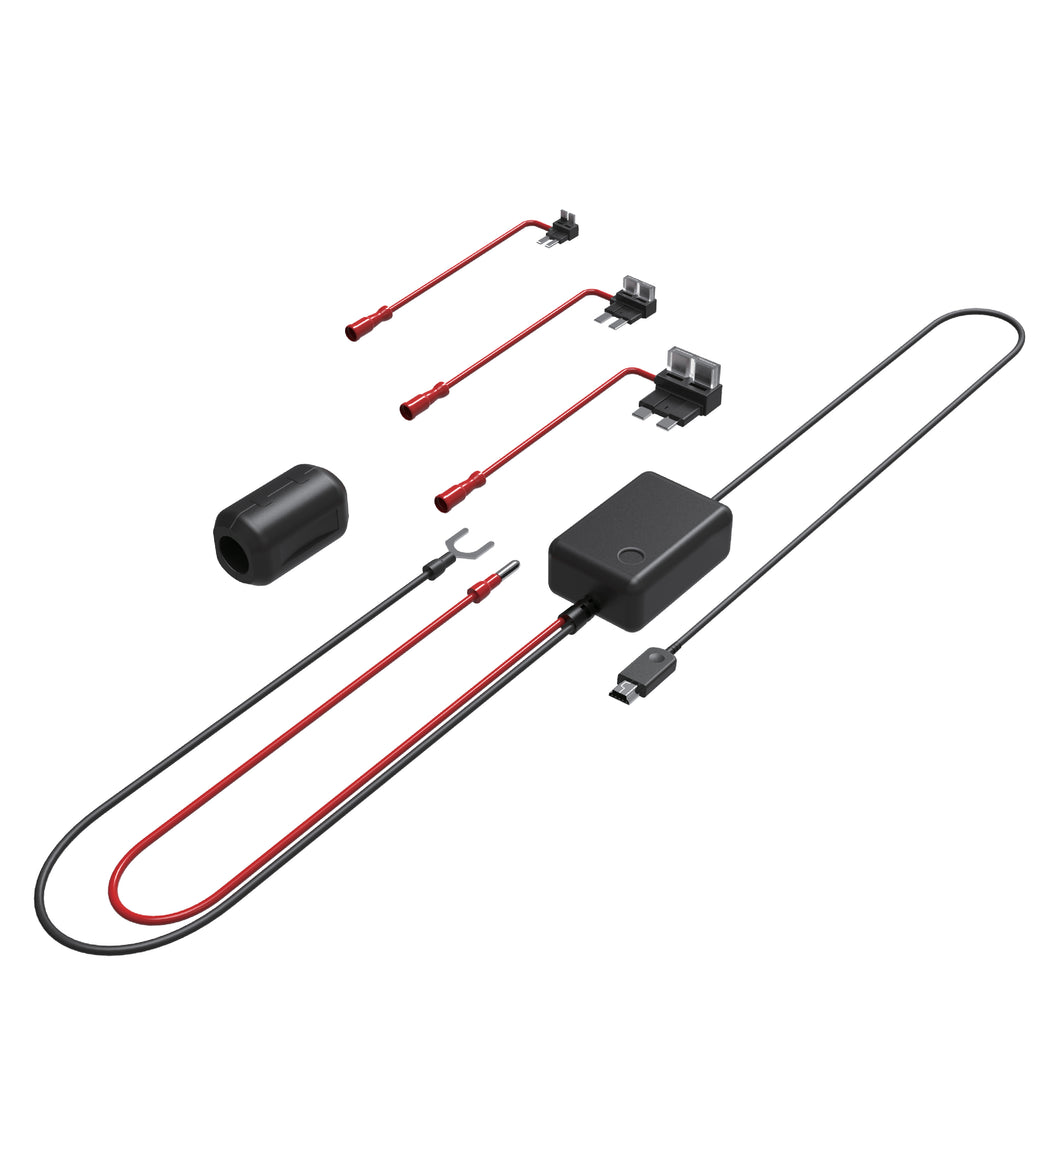 KENWOOD CA-DR1030 HARDWIRE KIT, ENABLES PARKED INCIDENT RECORDING (FOR DRV-A301W, DRV-A501WDP & DRV-A601WDP)